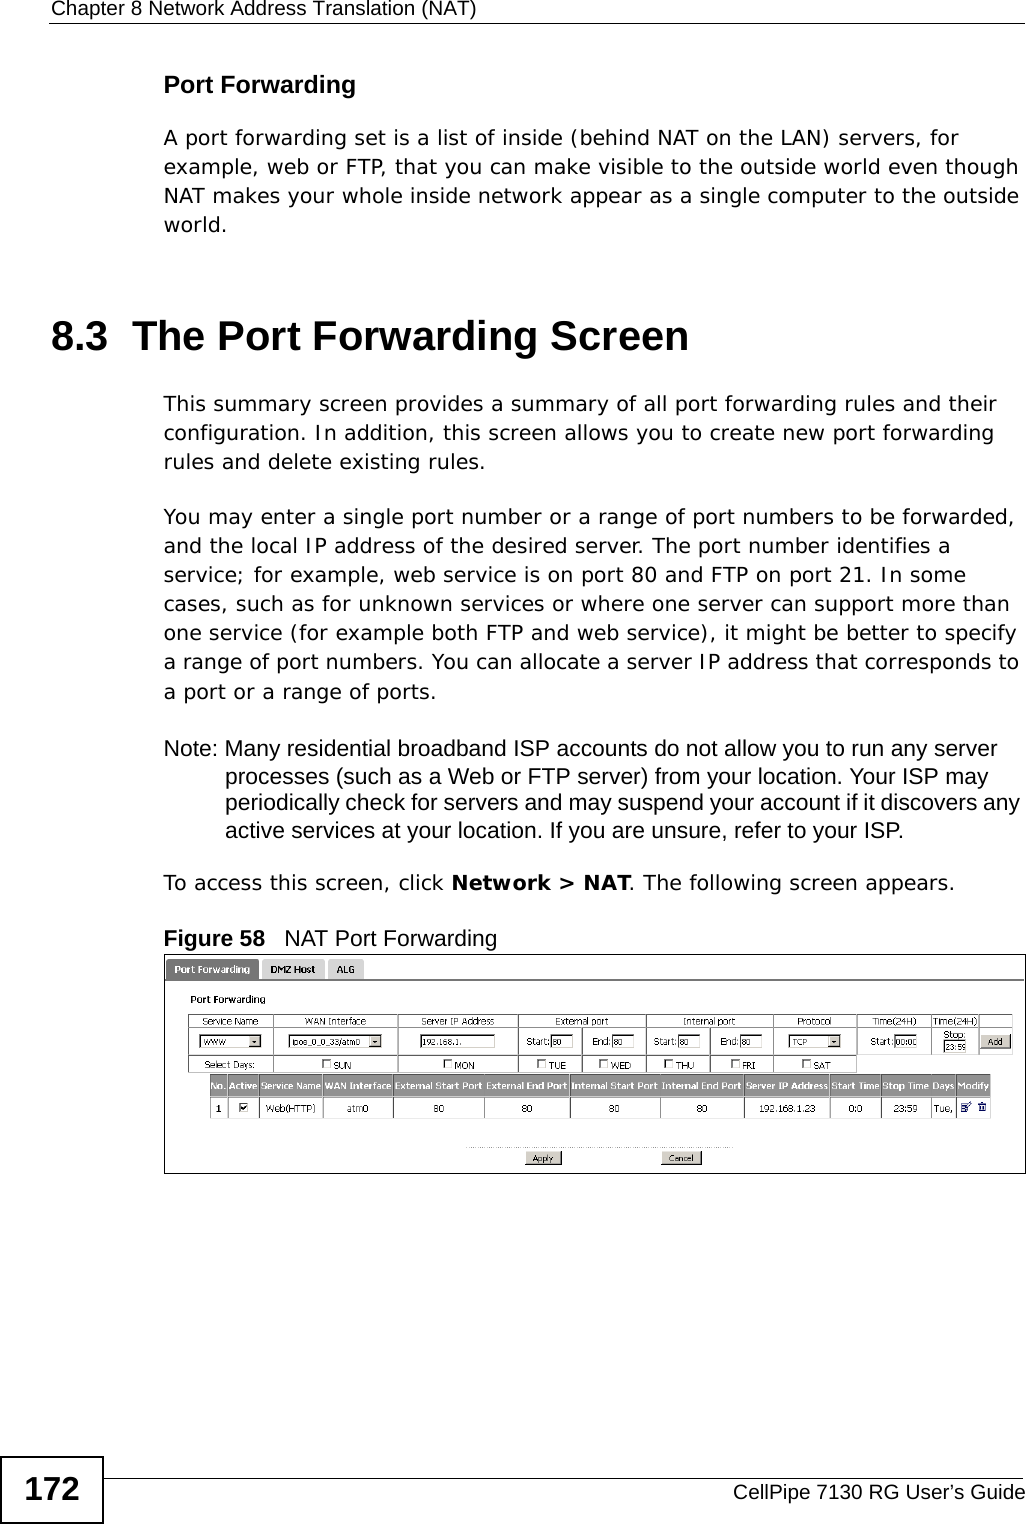 Chapter 8 Network Address Translation (NAT)CellPipe 7130 RG User’s Guide172Port ForwardingA port forwarding set is a list of inside (behind NAT on the LAN) servers, for example, web or FTP, that you can make visible to the outside world even though NAT makes your whole inside network appear as a single computer to the outside world.8.3  The Port Forwarding ScreenThis summary screen provides a summary of all port forwarding rules and their configuration. In addition, this screen allows you to create new port forwarding rules and delete existing rules.You may enter a single port number or a range of port numbers to be forwarded, and the local IP address of the desired server. The port number identifies a service; for example, web service is on port 80 and FTP on port 21. In some cases, such as for unknown services or where one server can support more than one service (for example both FTP and web service), it might be better to specify a range of port numbers. You can allocate a server IP address that corresponds to a port or a range of ports.Note: Many residential broadband ISP accounts do not allow you to run any server processes (such as a Web or FTP server) from your location. Your ISP may periodically check for servers and may suspend your account if it discovers any active services at your location. If you are unsure, refer to your ISP.To access this screen, click Network &gt; NAT. The following screen appears.Figure 58   NAT Port Forwarding 